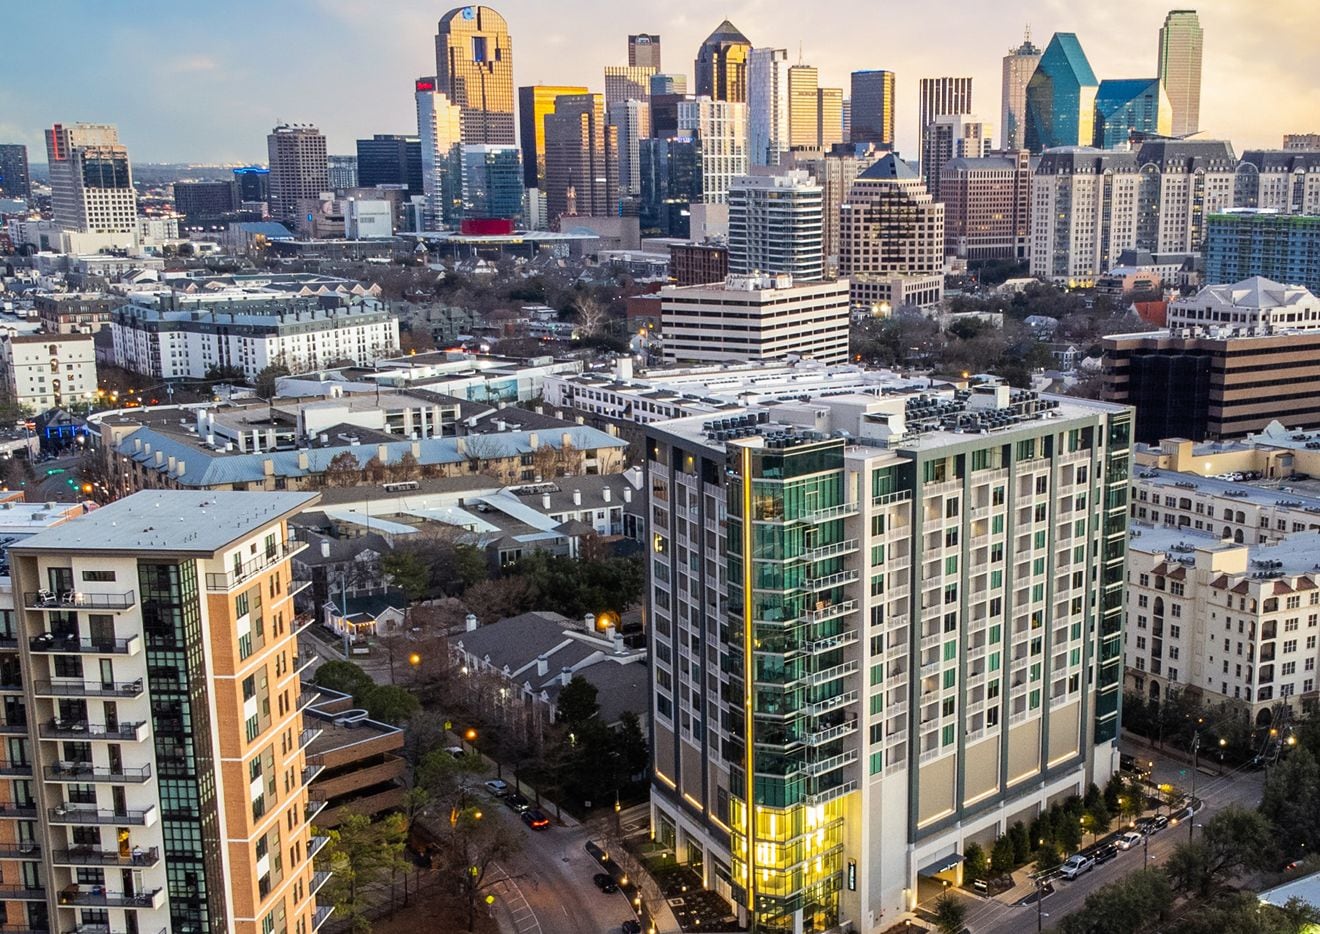 D-FW commercial property tax appraisals are causing concern for building owners.